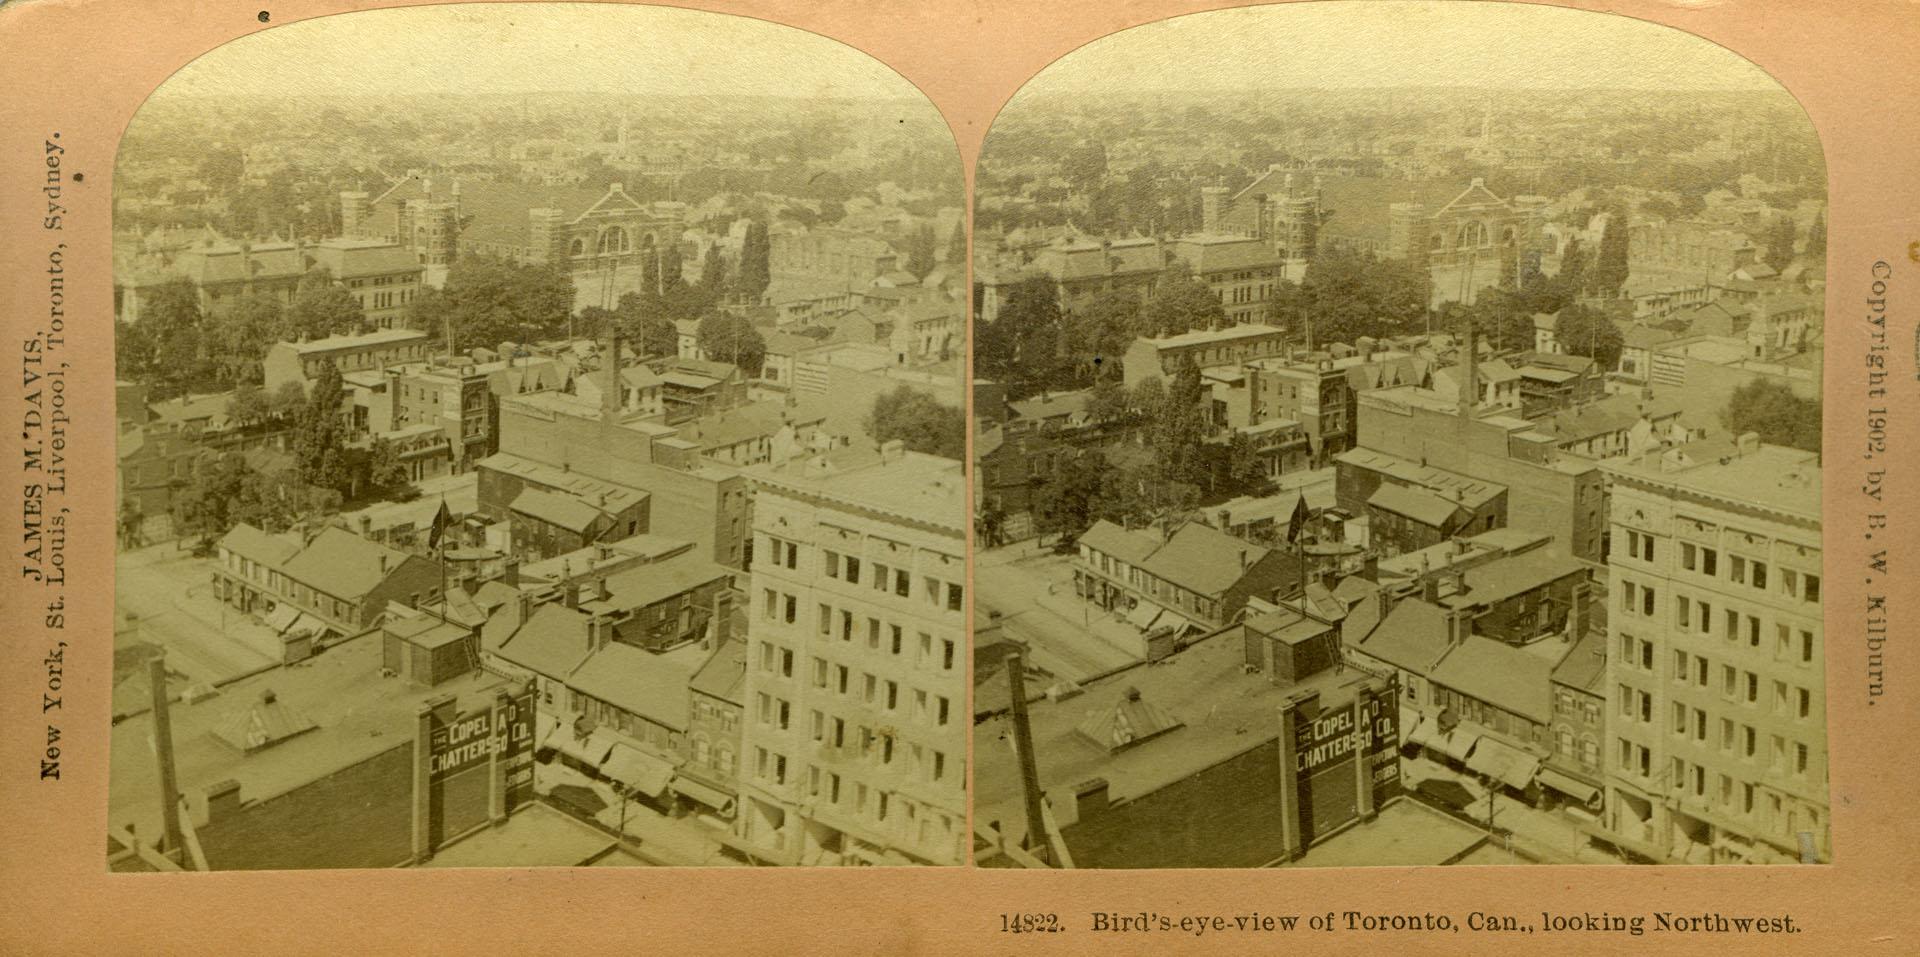 Looking n.west from Temple Building. (Richmond St. West, n.west corner Bay St.), Queen St. West, west of Bay St. in foreground